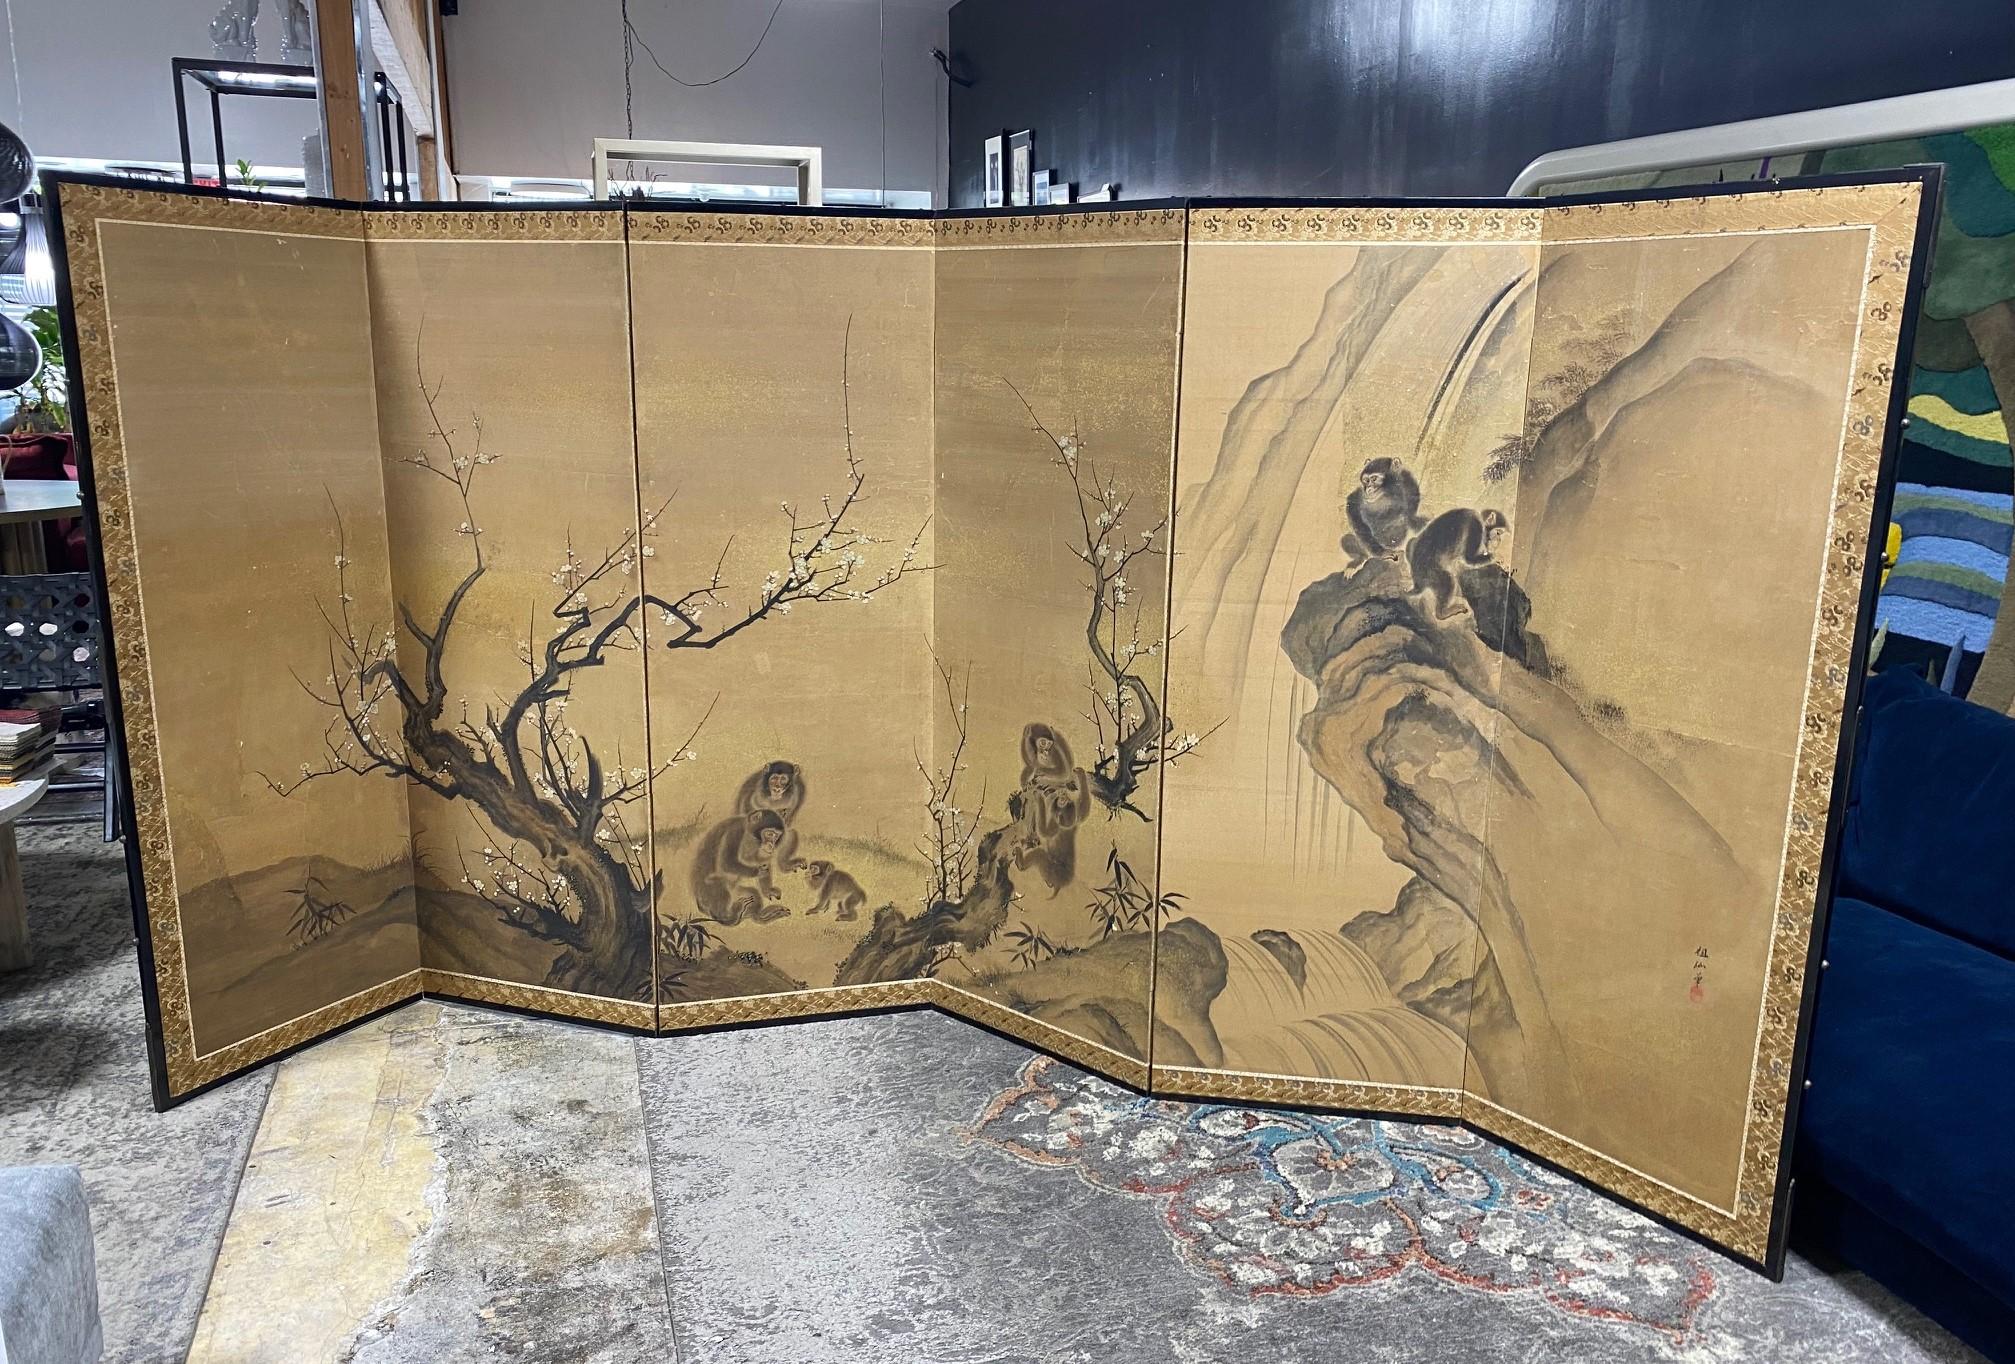 An absolutely gorgeous, wonderfully composed six-panel Japanese Byobu folding screen/room divider depicting a family of playful monkeys among the blooming trees and mountainous landscape. The beautiful hand painted detail really makes this an